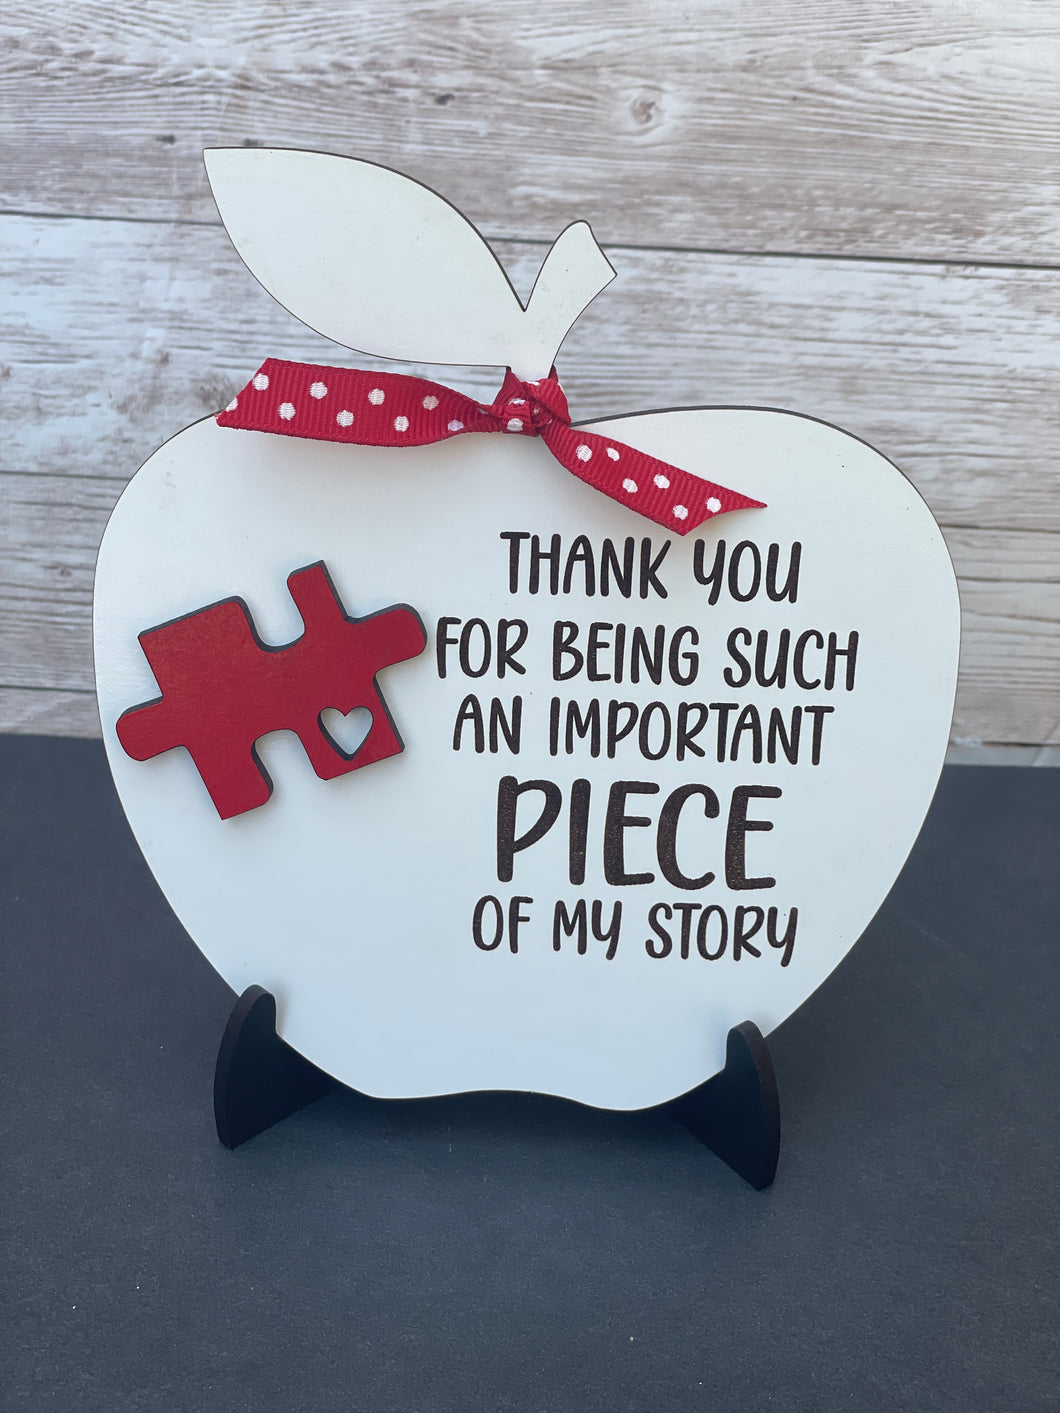 Thank you for being such an important piece of my story - Apple sign for teacher